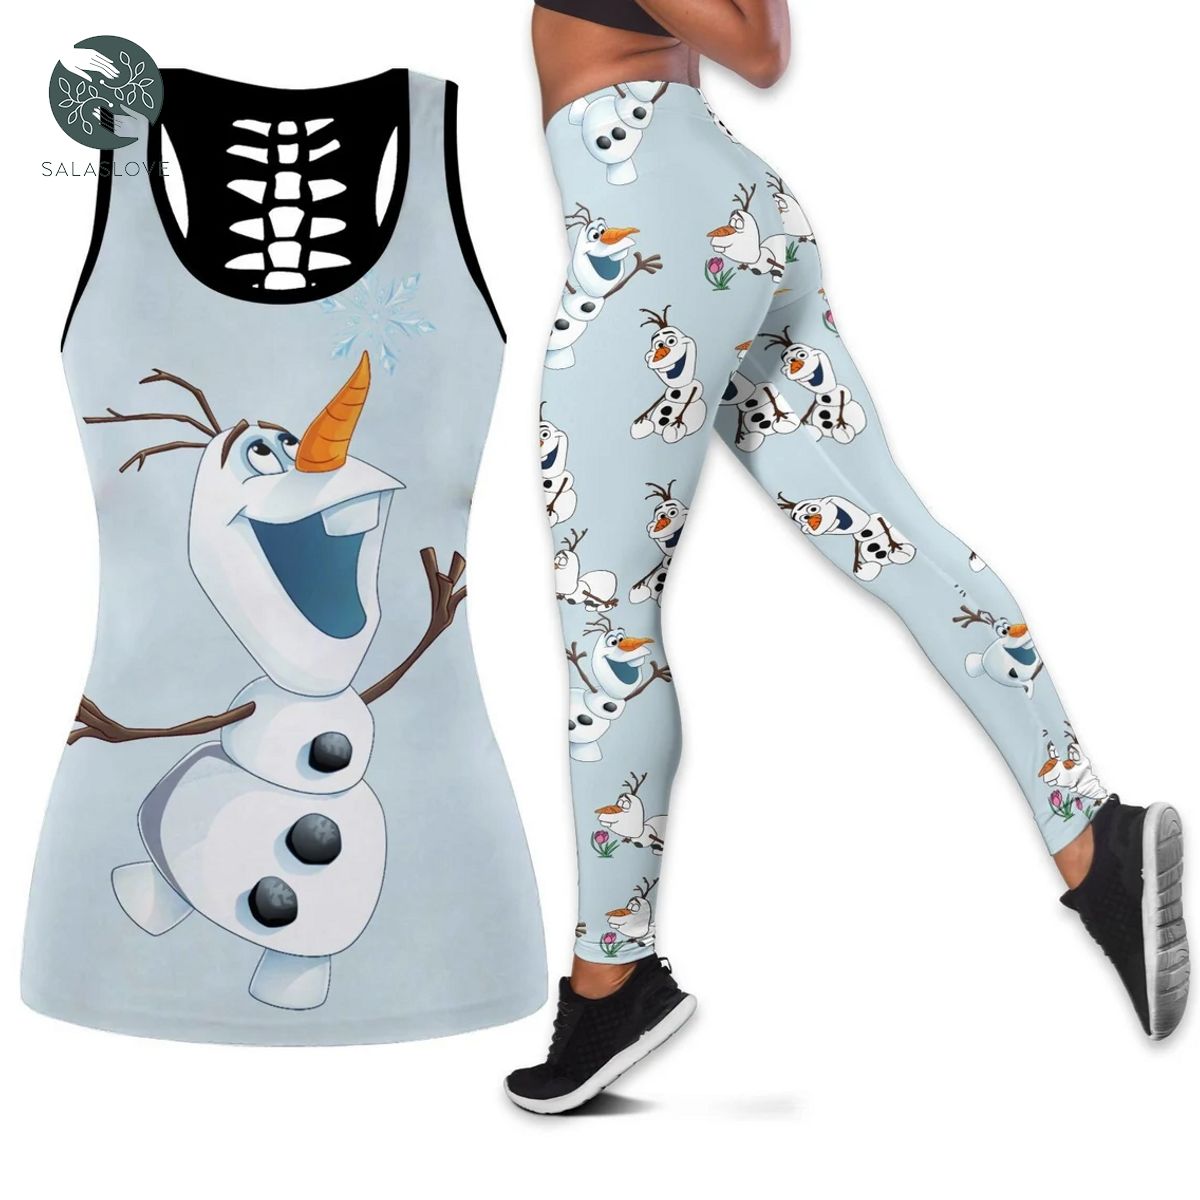 Big Olaf Snowman Frozen Combo Tank Top And Leggings 